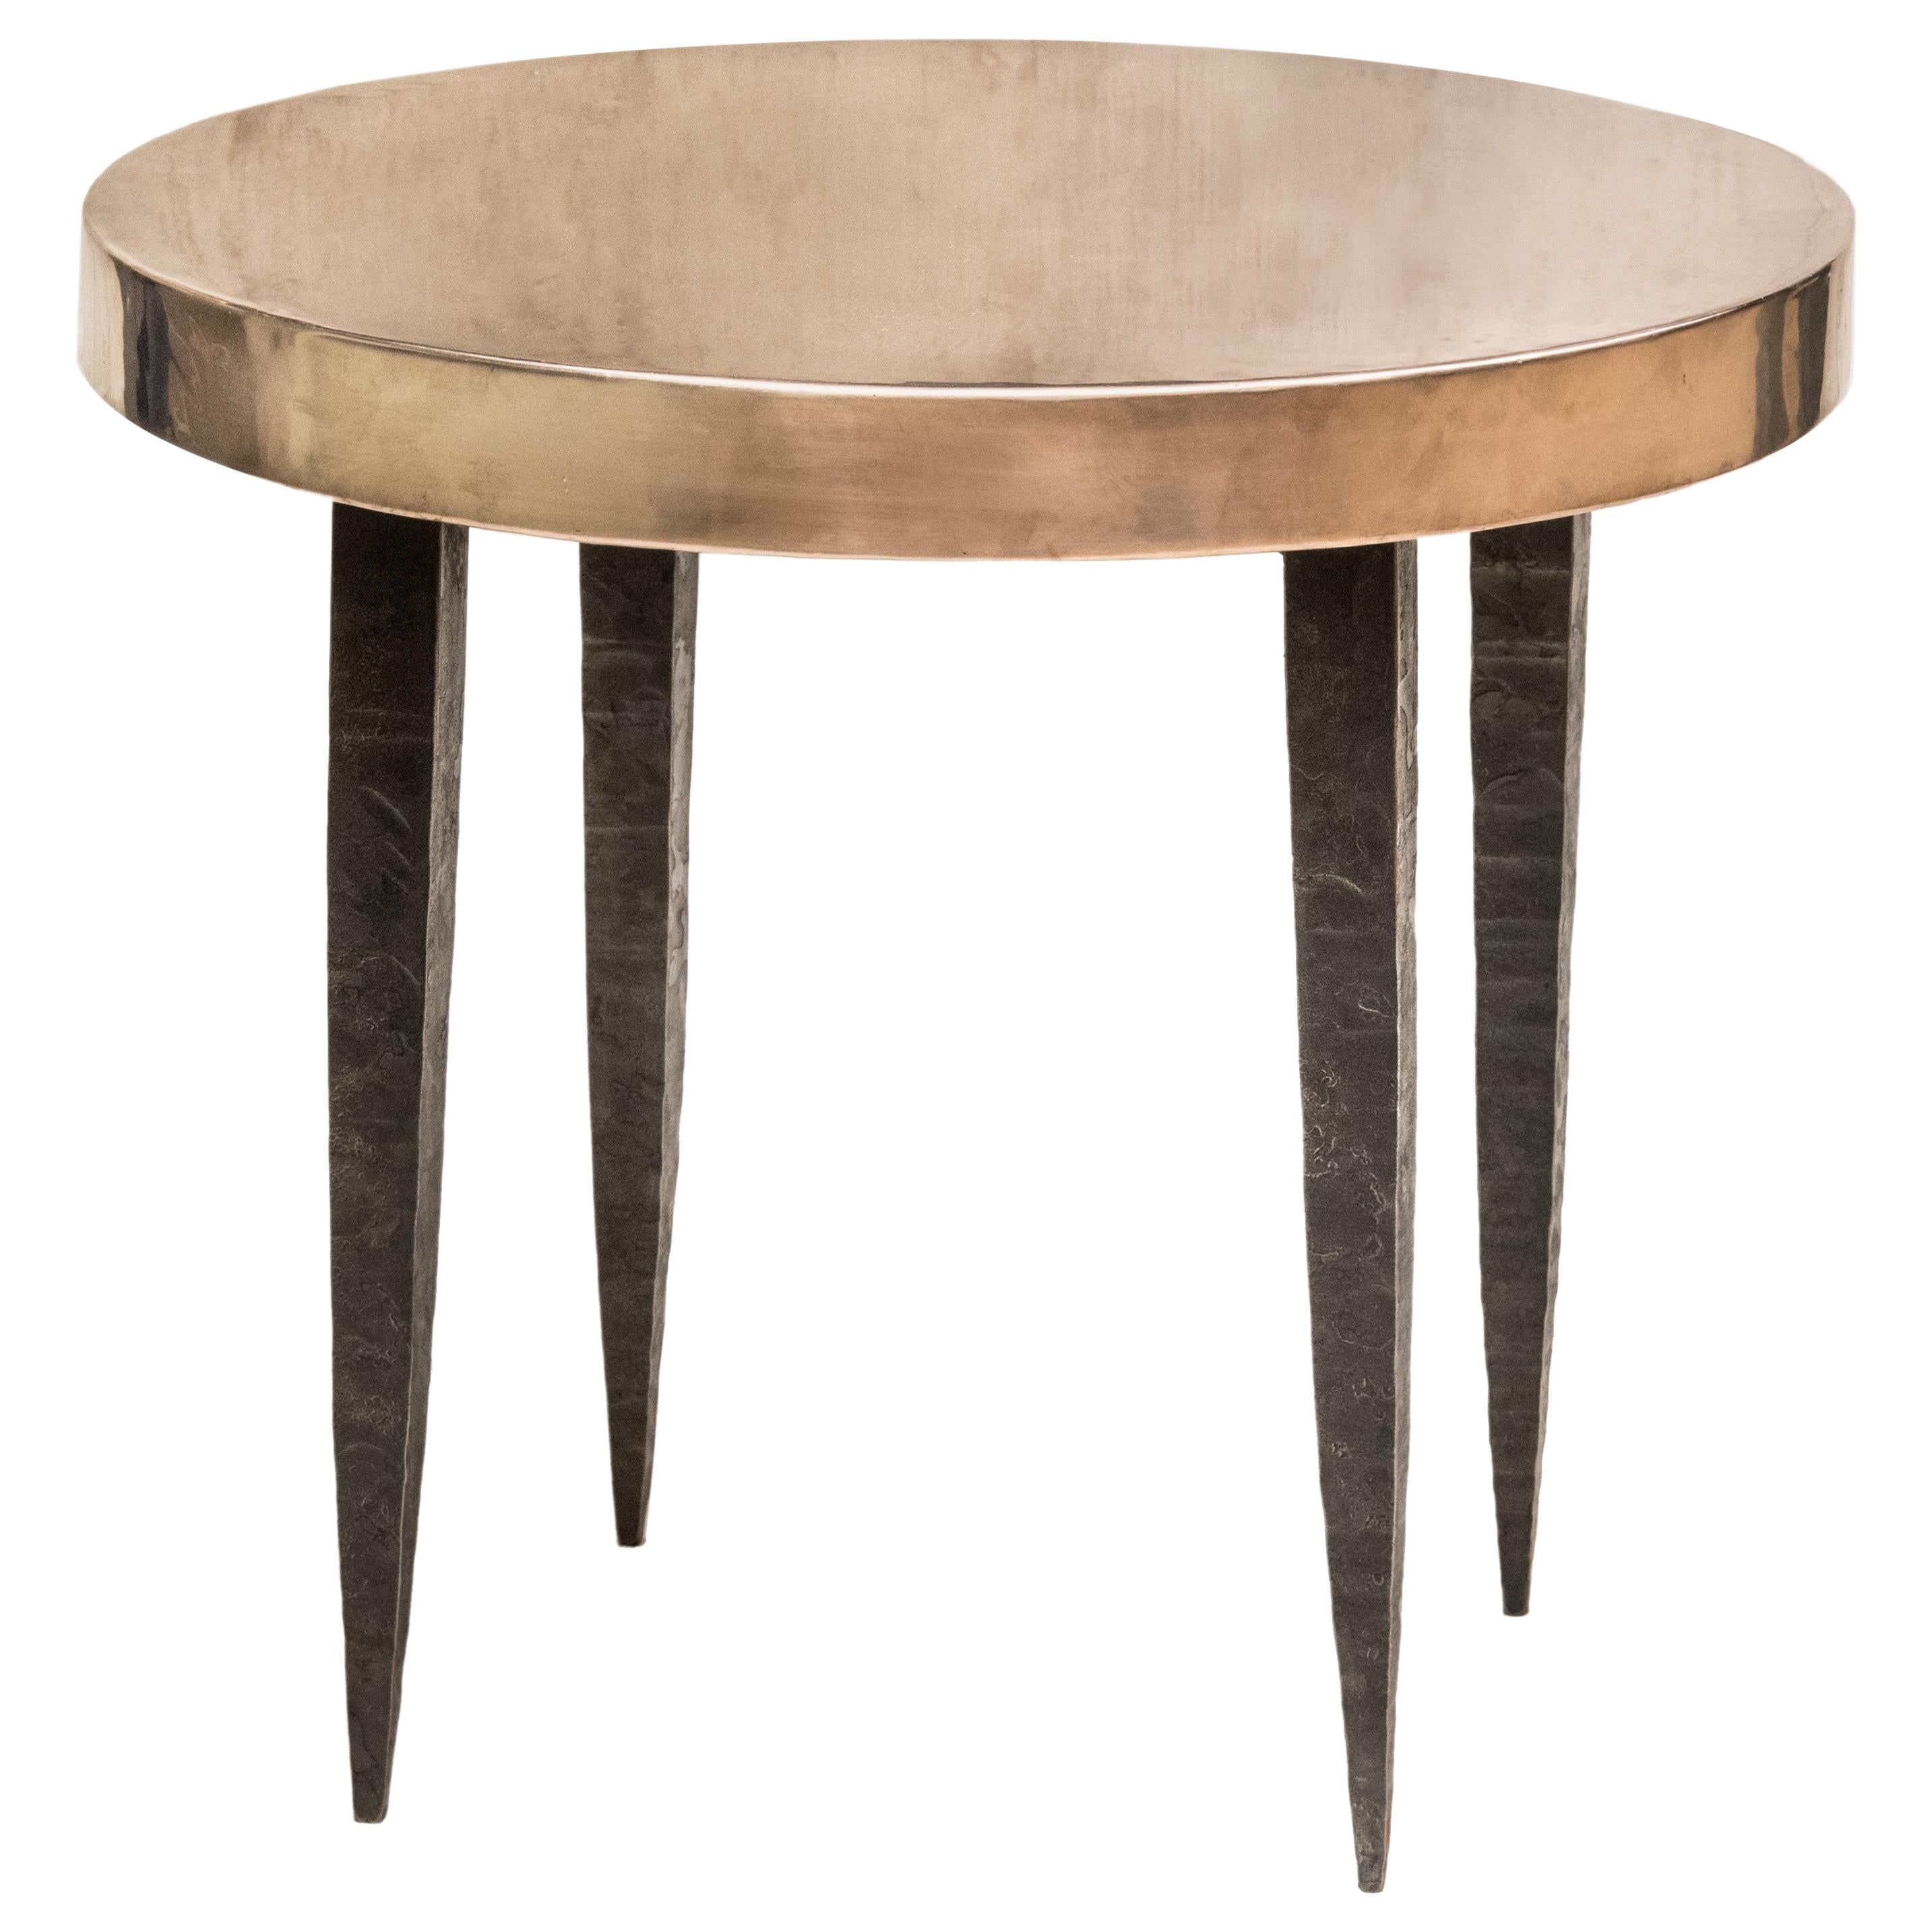 Round Bronze Side Table with Tapered Steel Legs